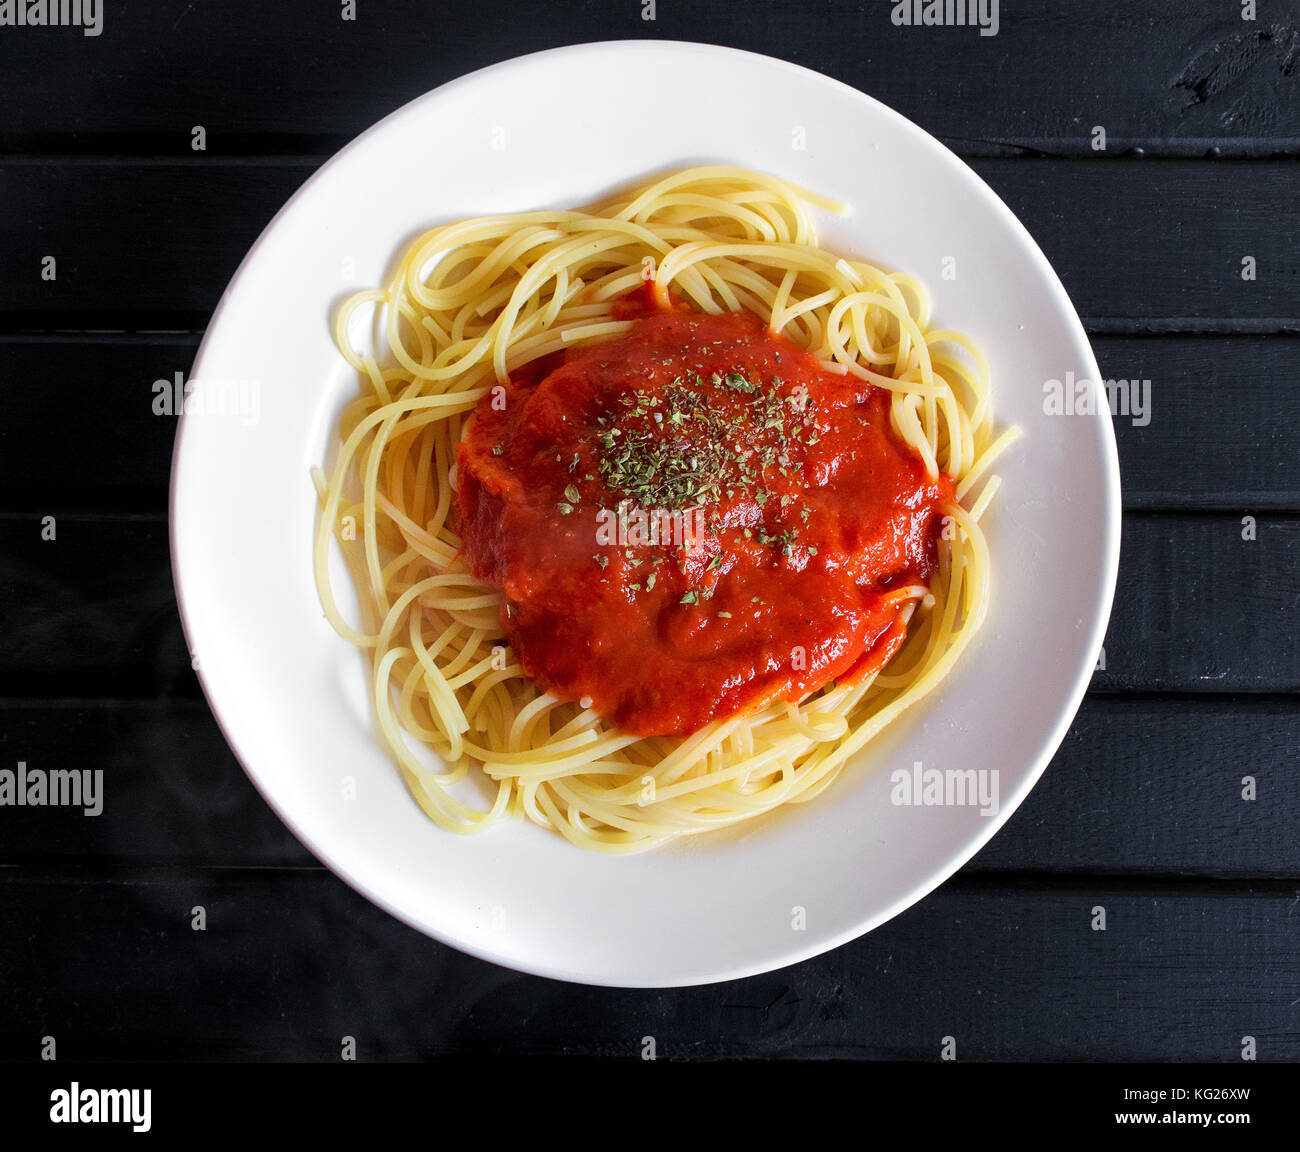 Cooked spaghetti pasta dish, hot with steam coming out, with red tomato sauce and oregano sprinkled on top, on a black wooden table background Stock Photo